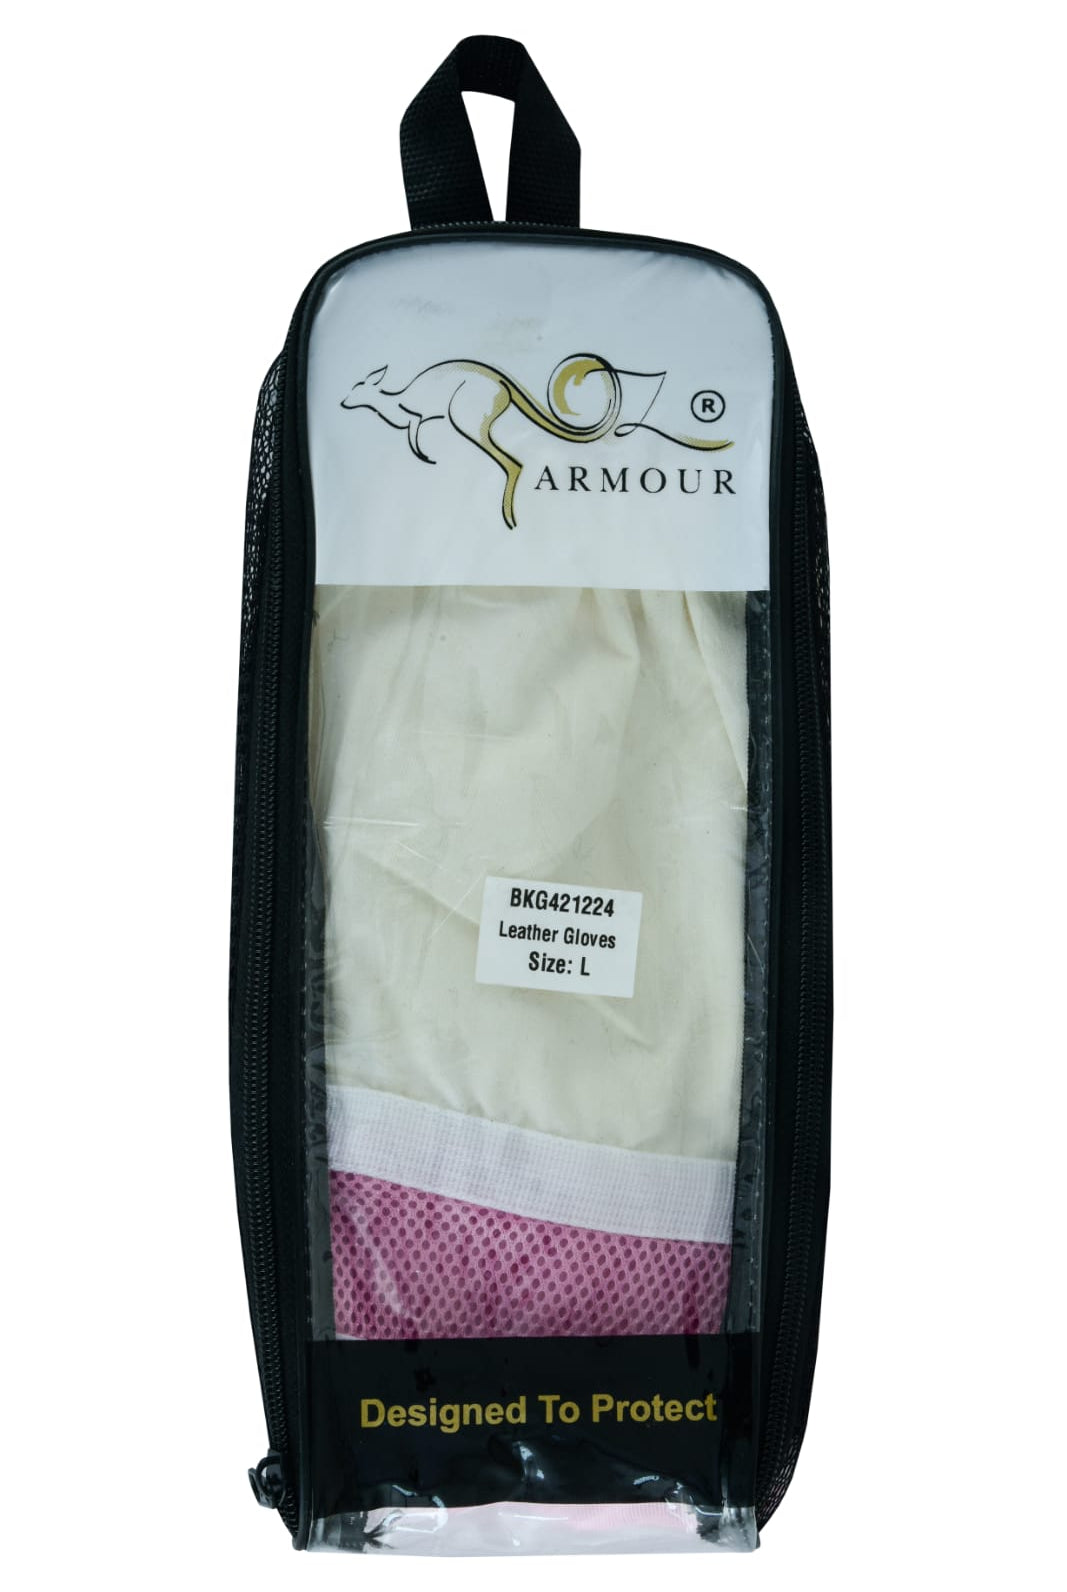 Unveil the elegance – OZ ARMOUR Pink Cow Hide Ventilated Gloves presented in stylish packaging.